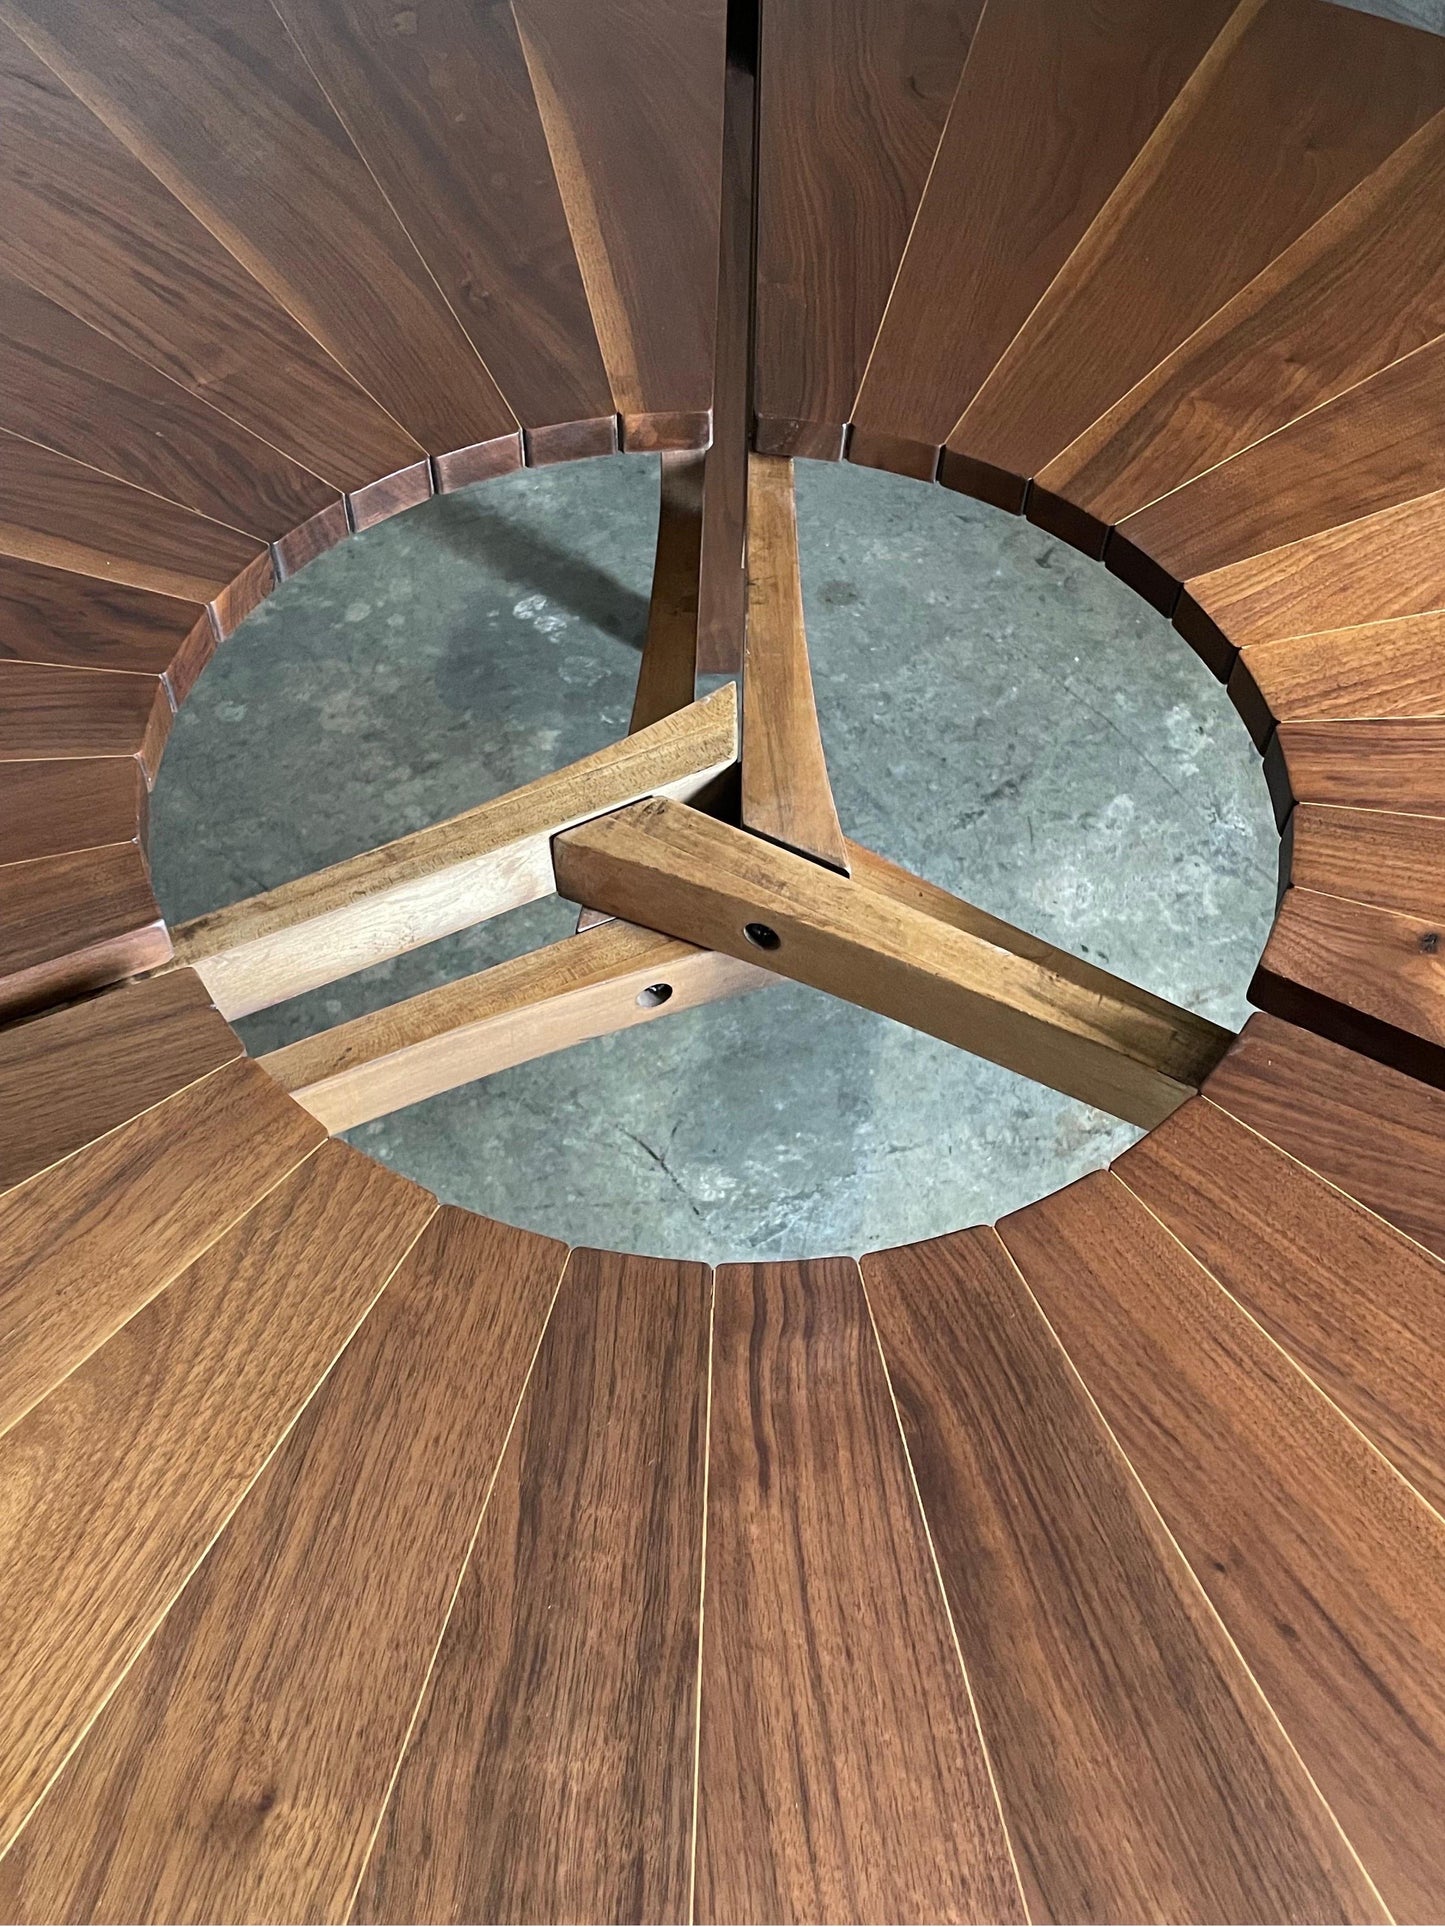 Studiocraft Round Petal Dining Table in Walnut and Maple, Charles Faucher 1975